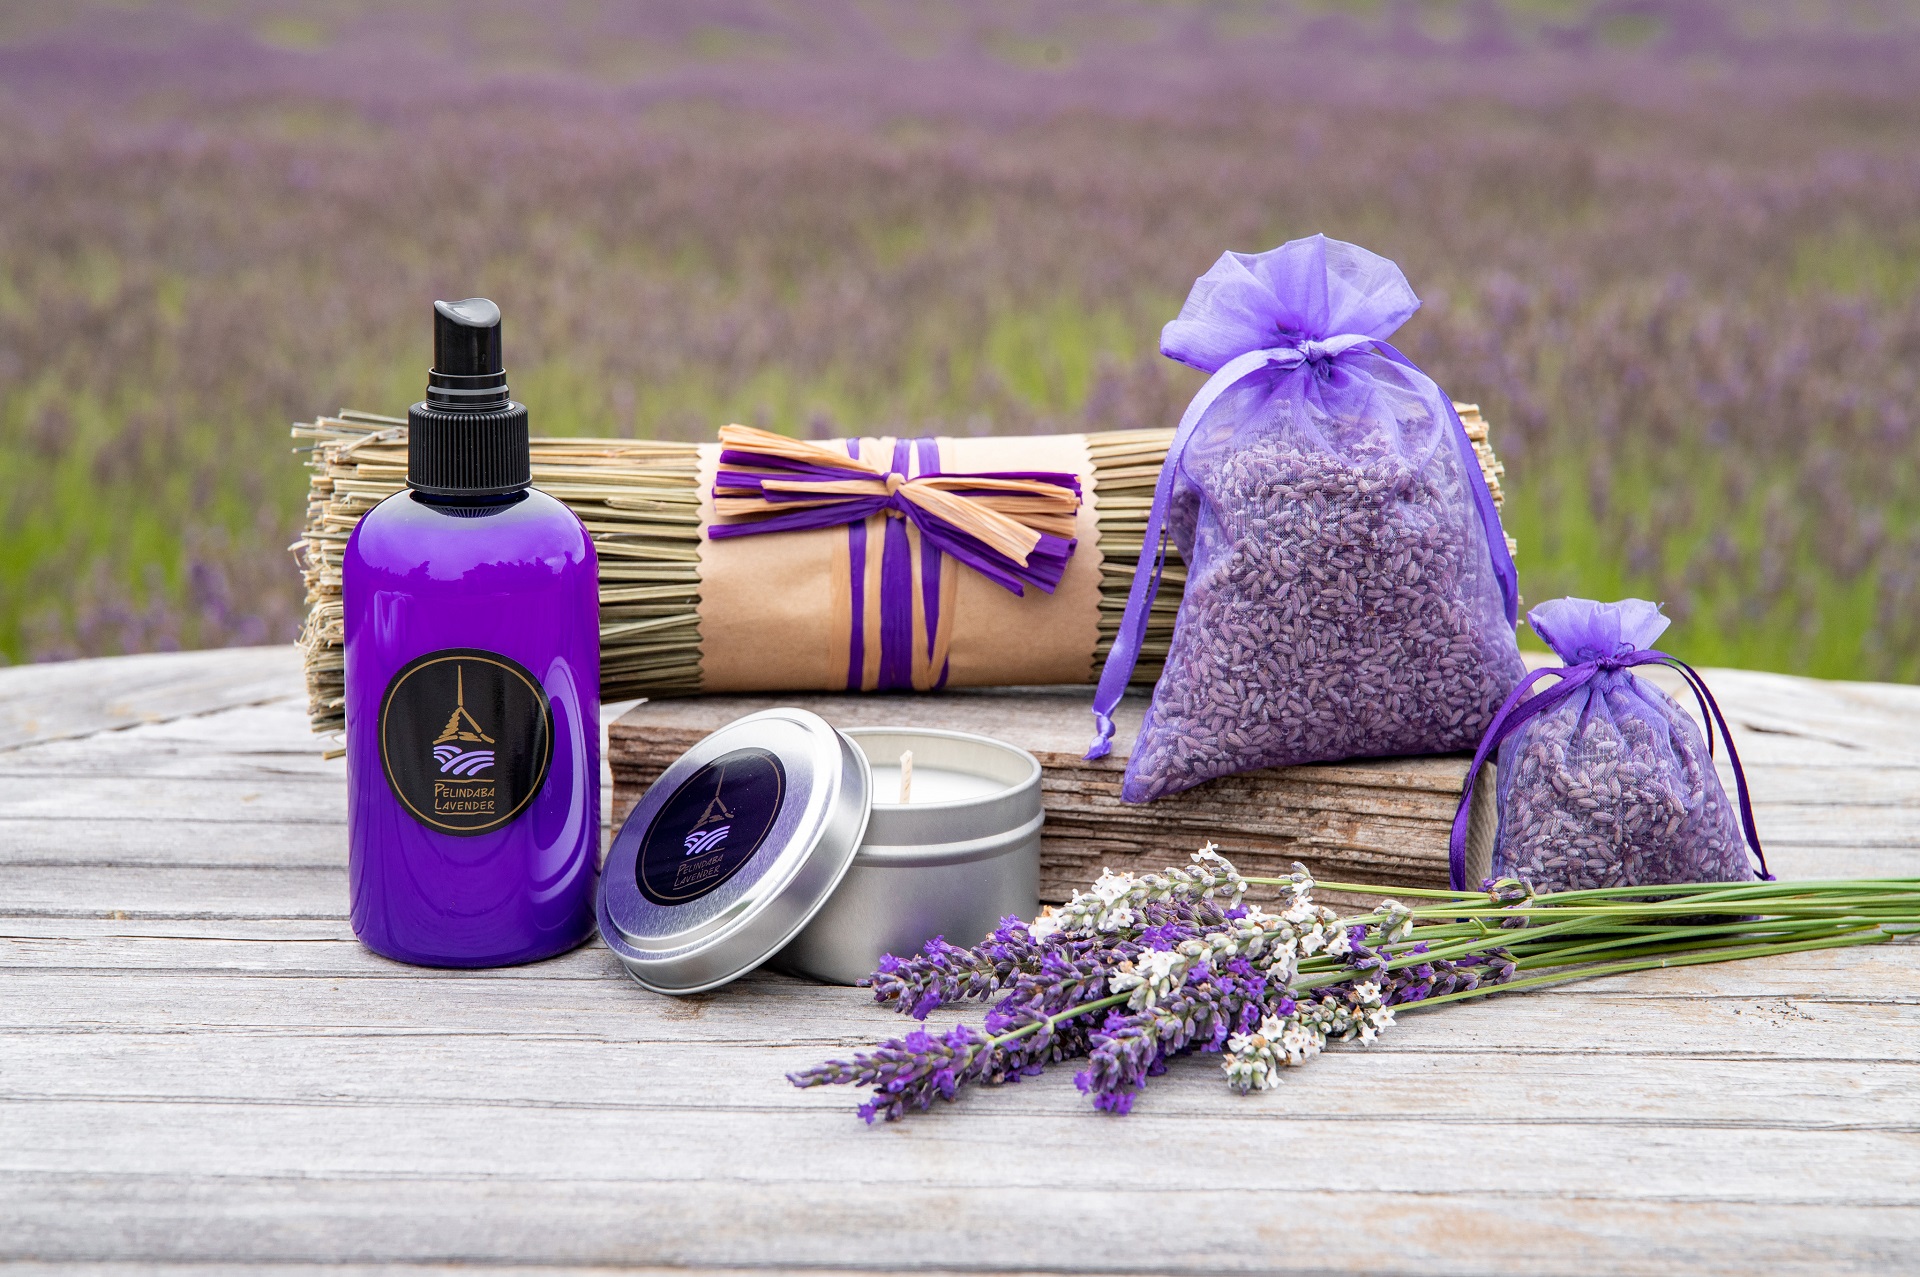 Cooking with Lavender - Pelindaba Lavender - Lavender Products and